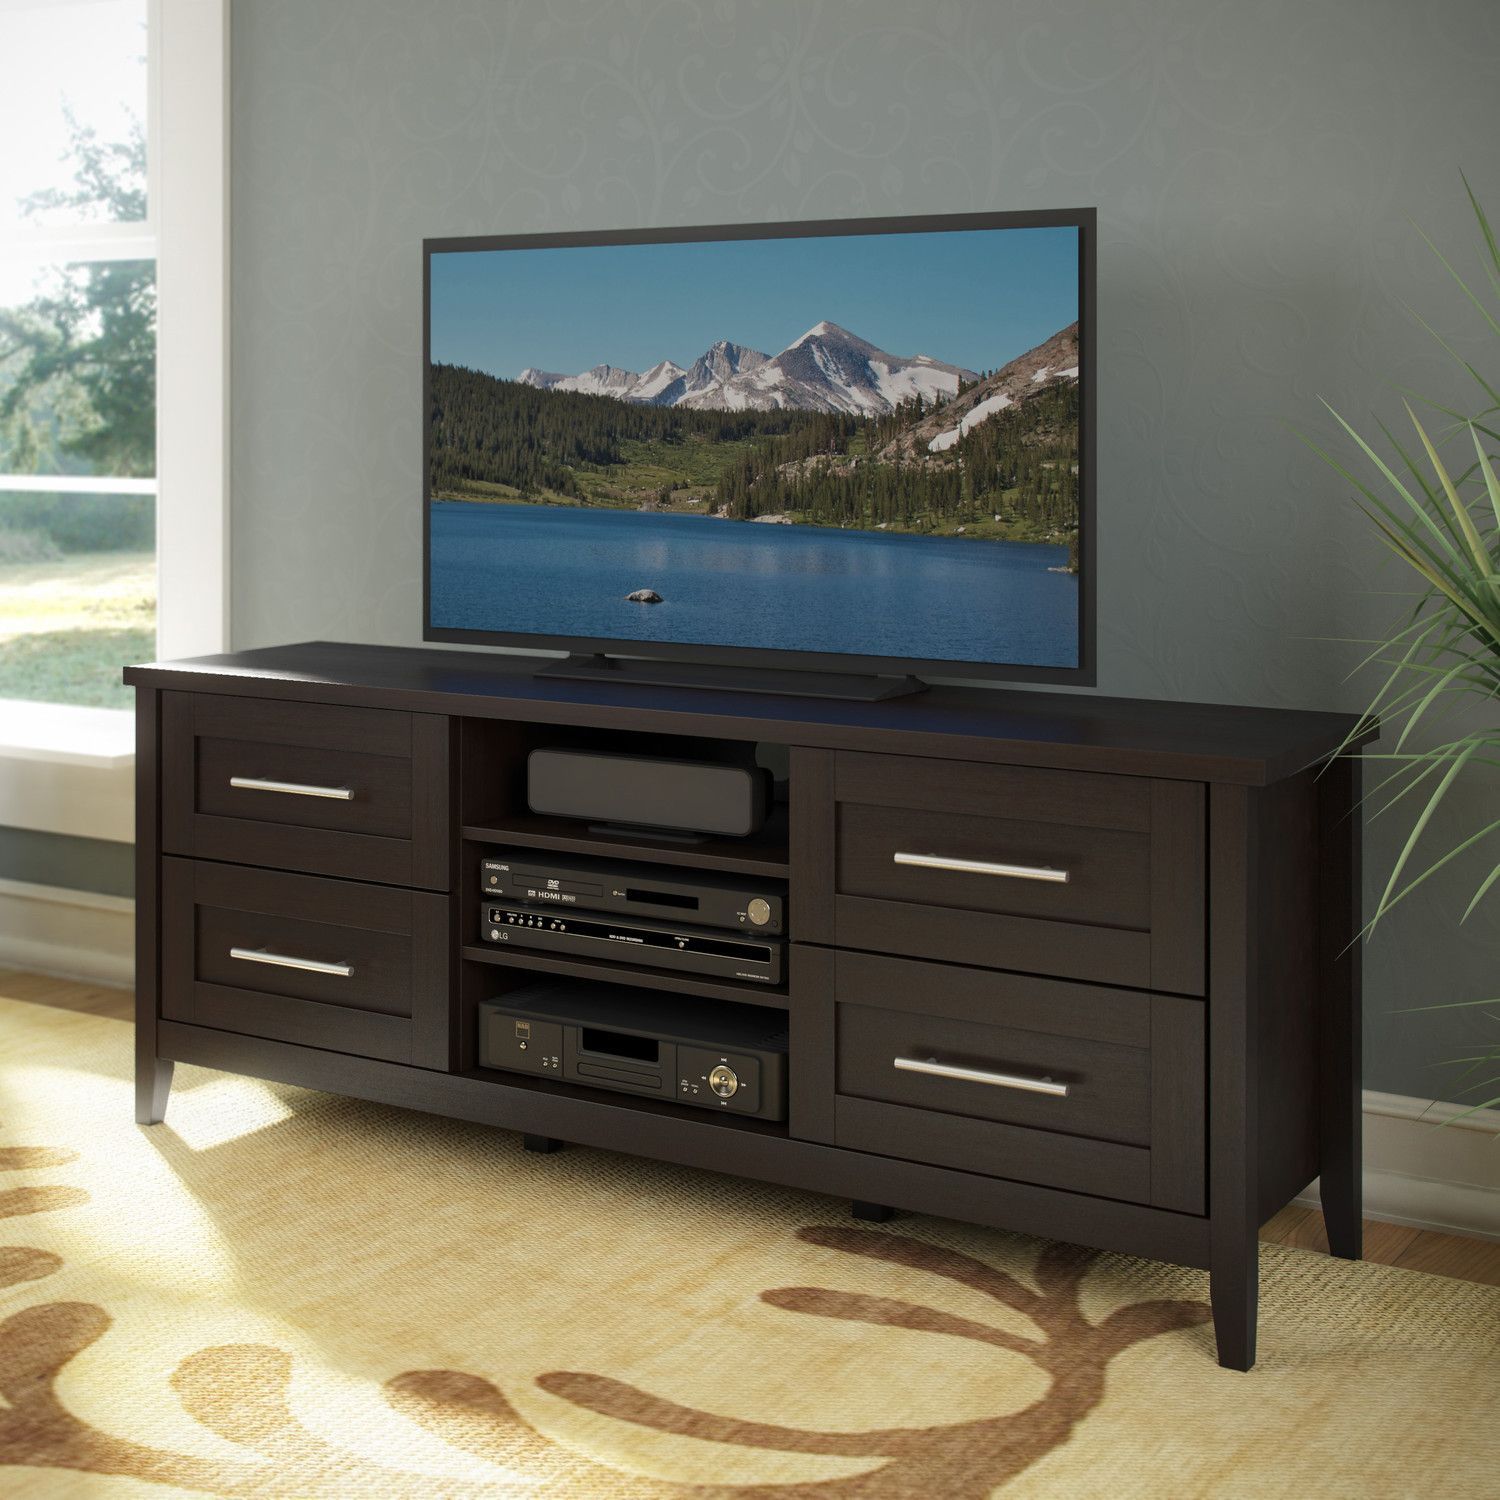 Hokku Designs Jackson Tv Stand & Reviews | Home Within Hokku Tv Stands (View 10 of 15)